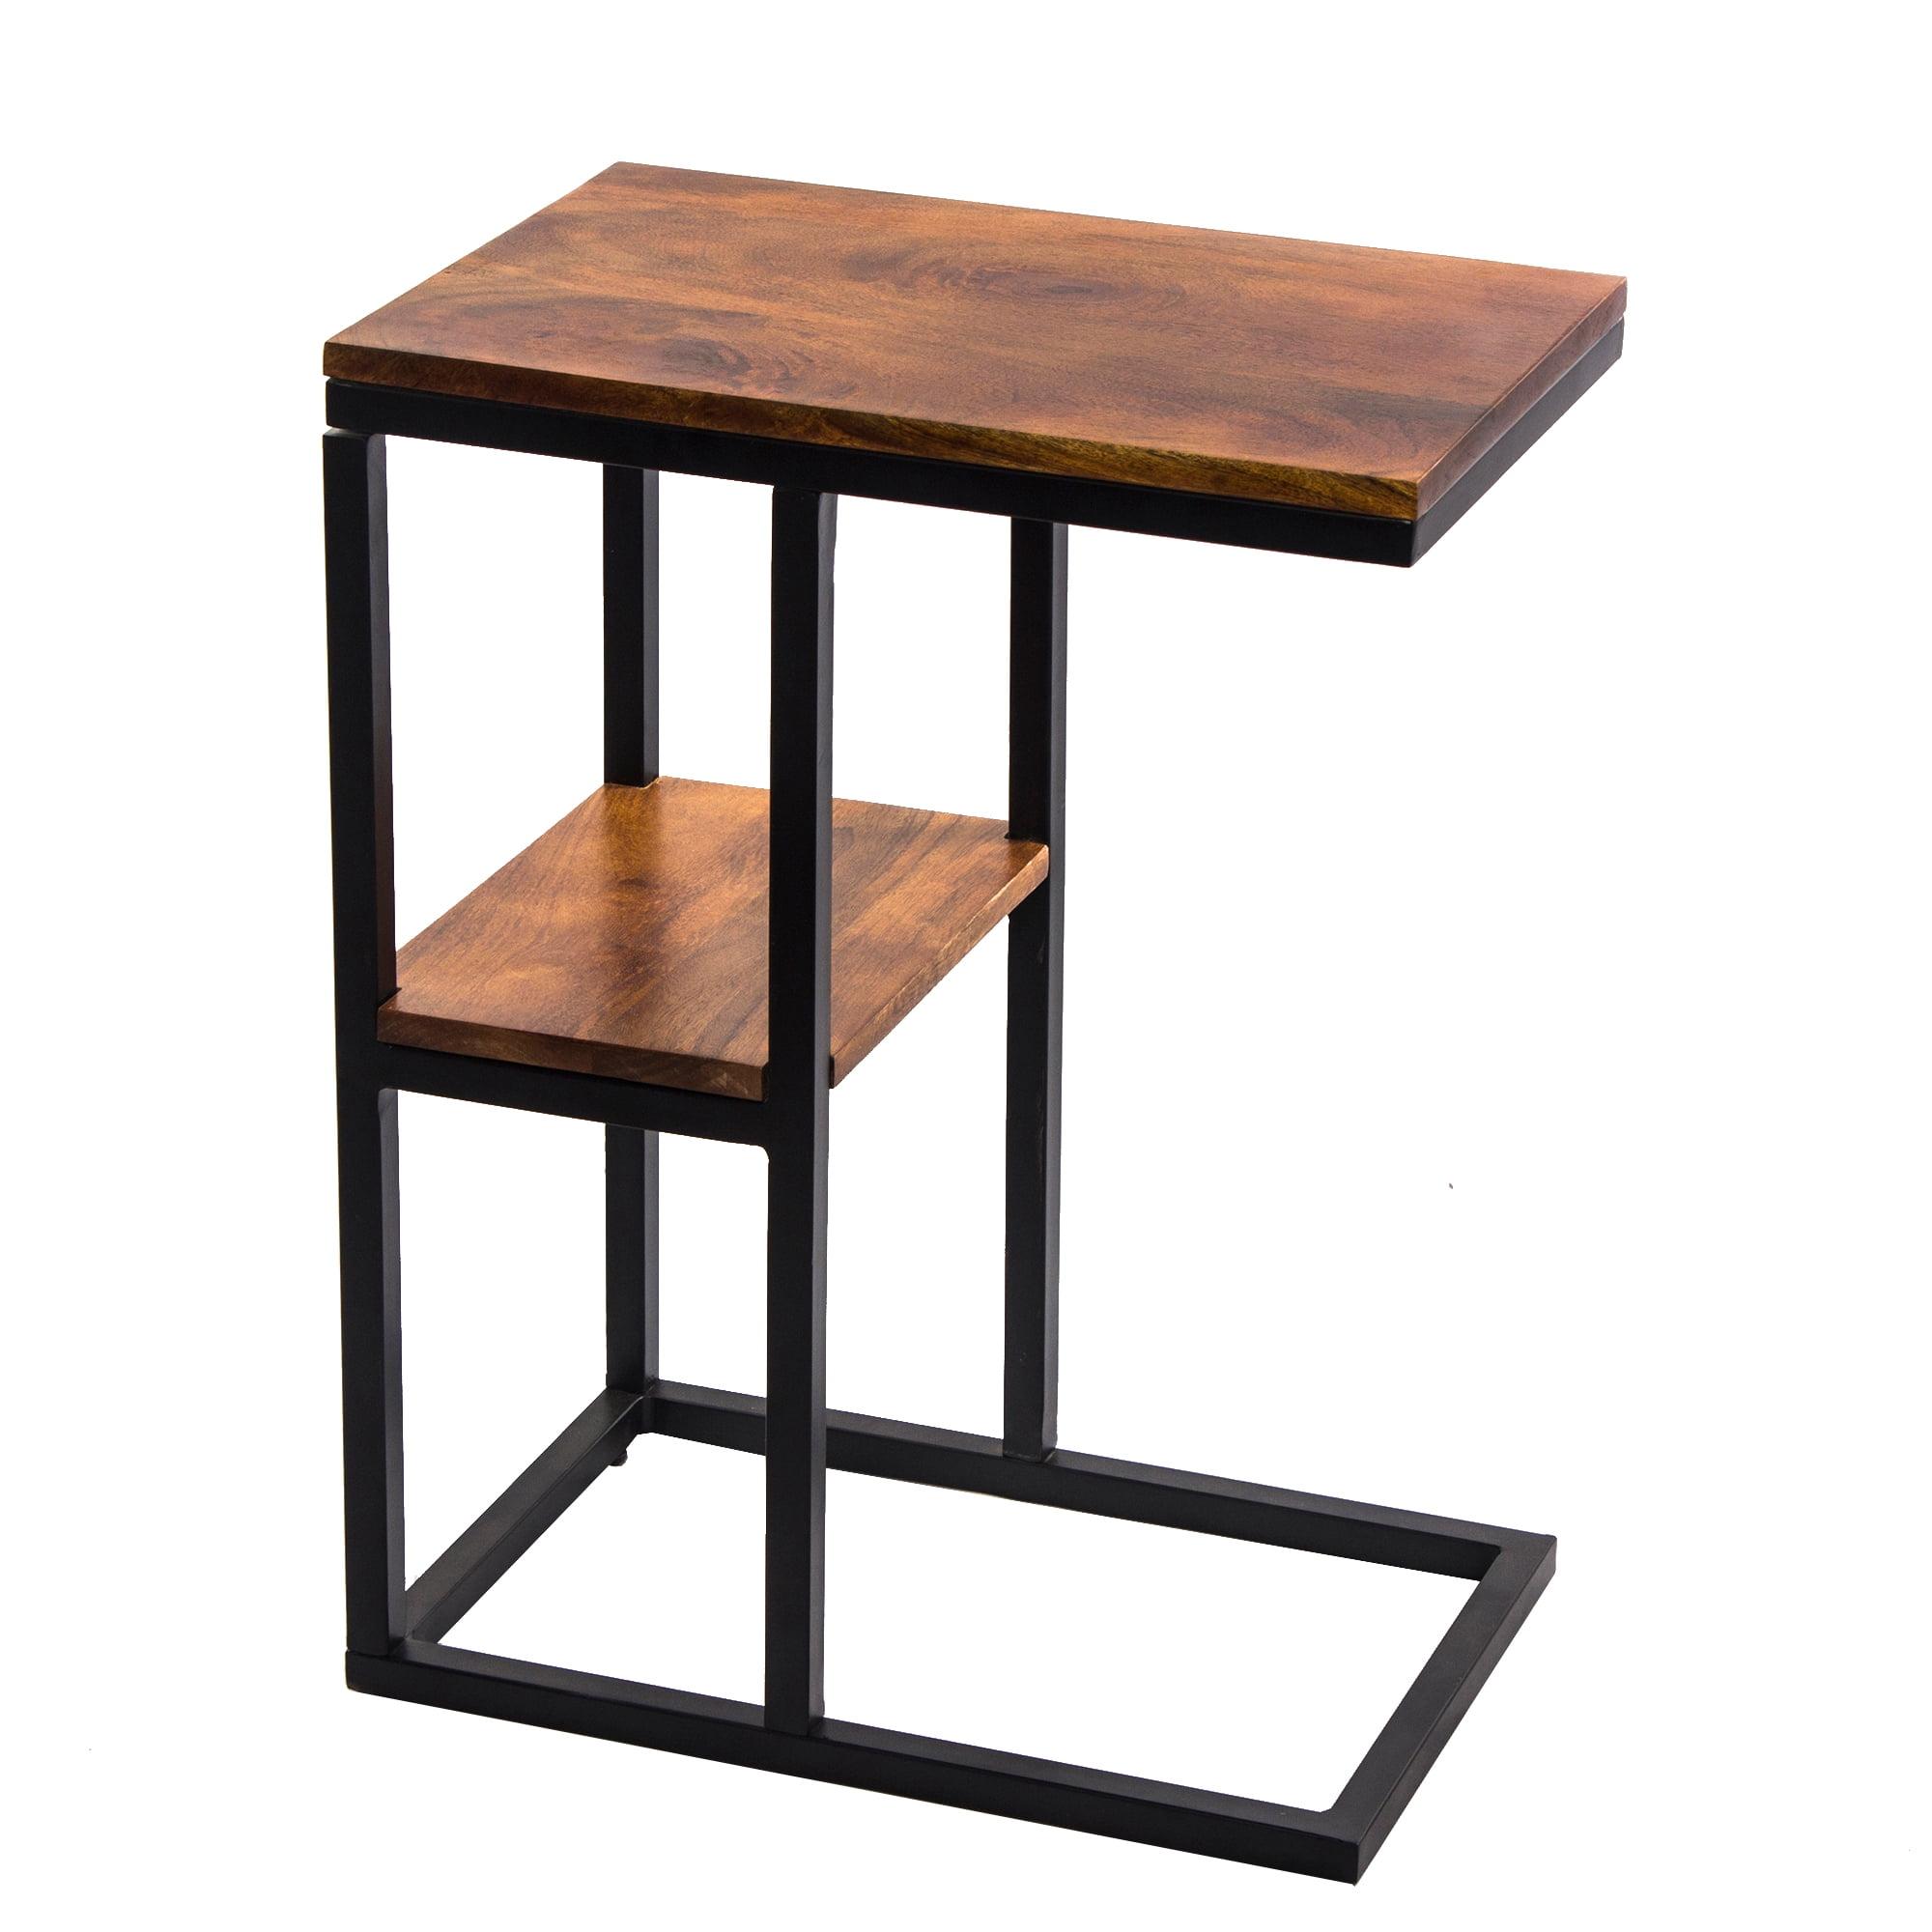 Mango Wood and Iron 12"x18" Accent Table with Lower Shelf - Brown